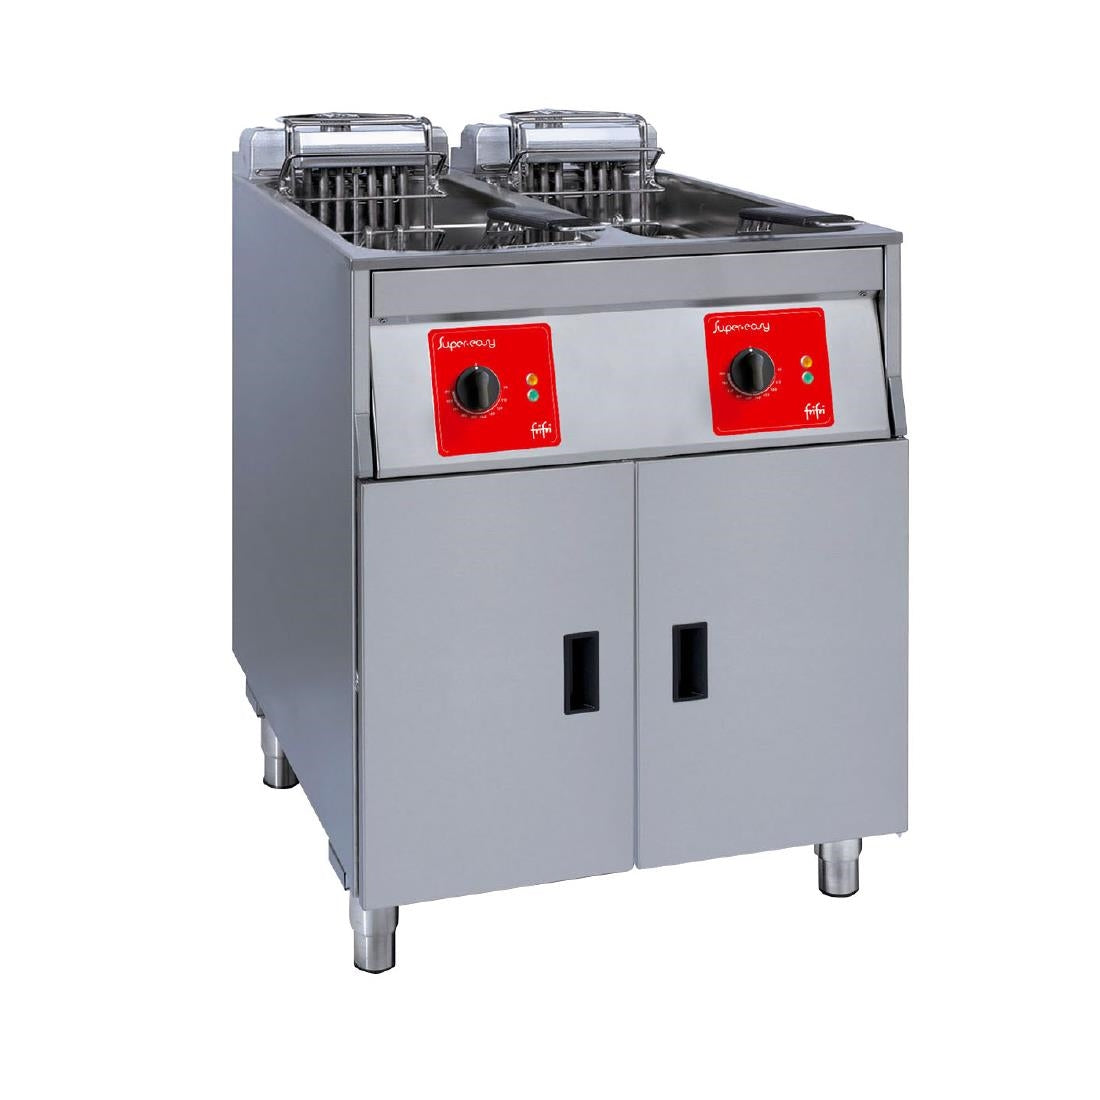 HS071-3PH FriFri Super Easy 622 Electric Free-standing Fryer Twin Tank Twin Baskets with Filtration 2x15kW Three Phase SL622H31G0